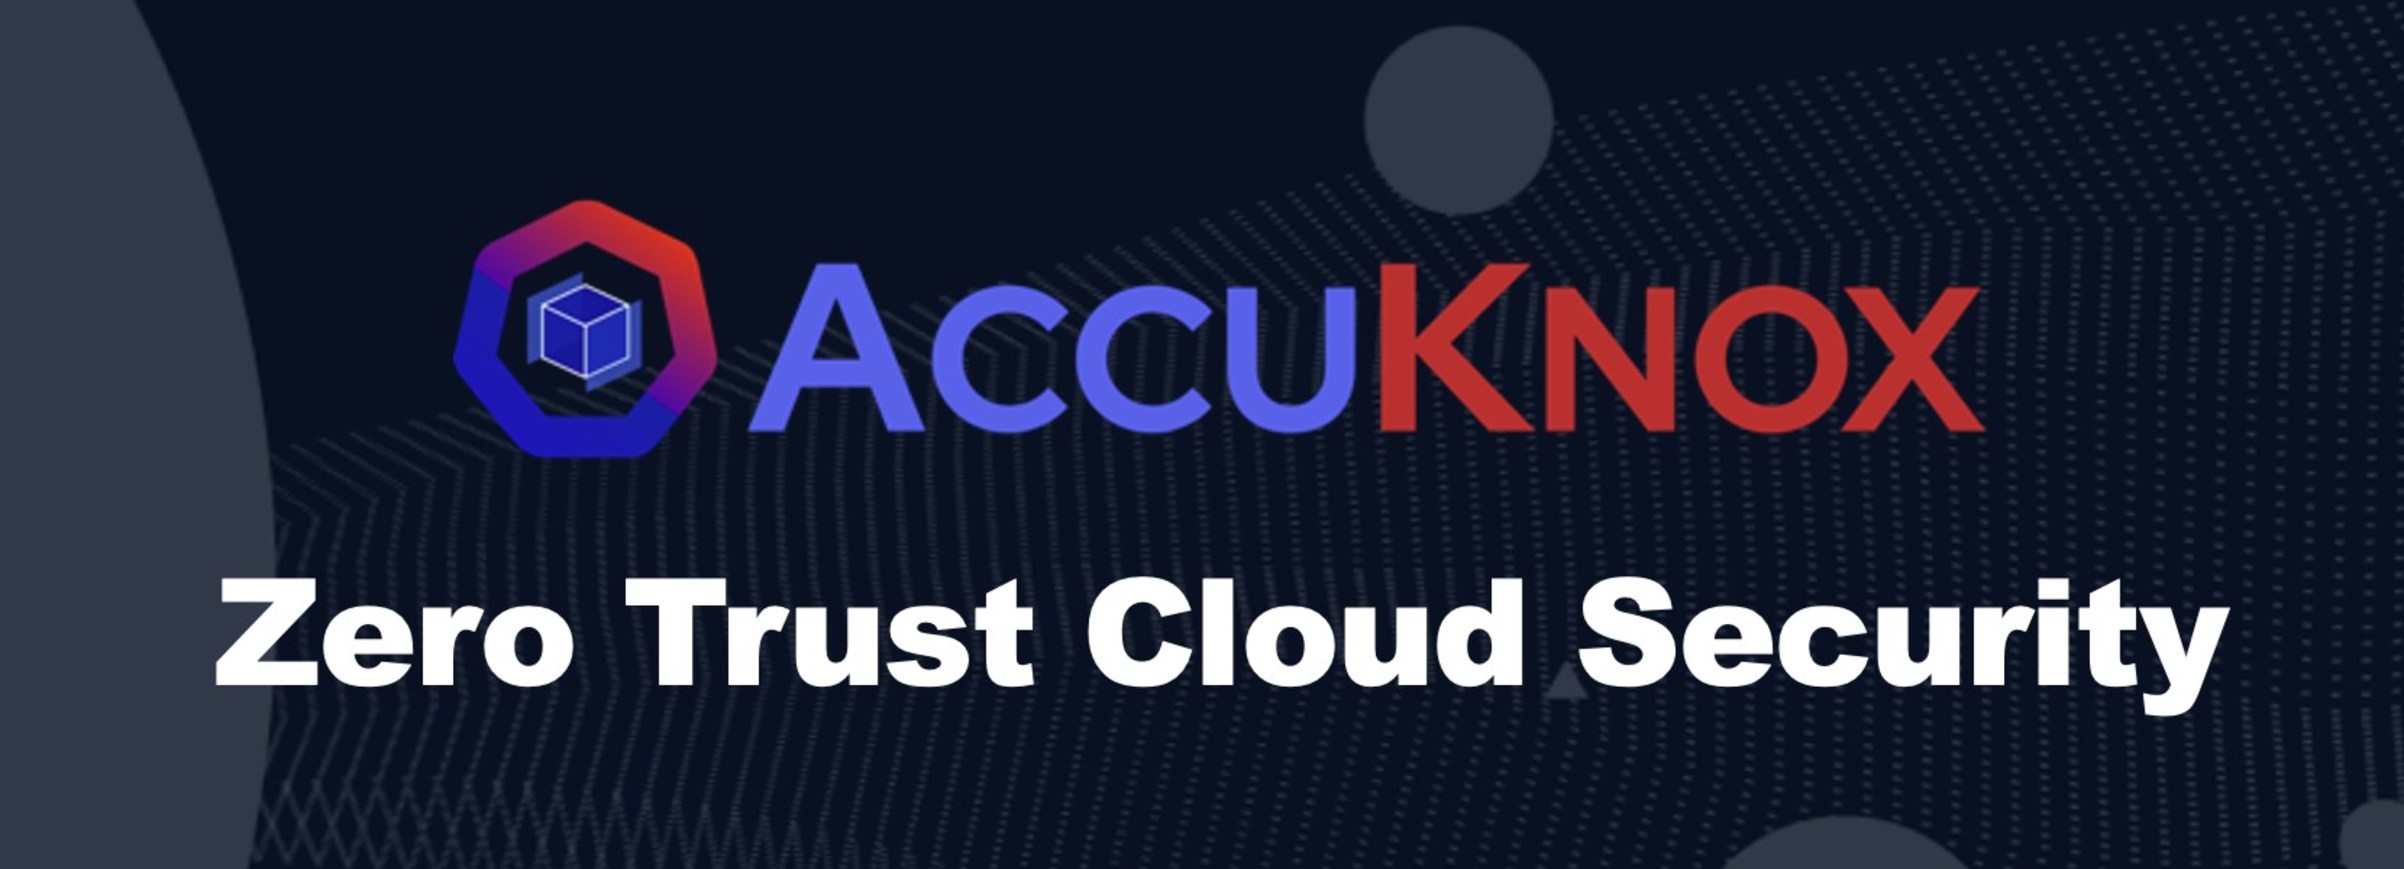 Working with AccuKnox a provider of Zero-Trust Cloud Native Application Protection Platform